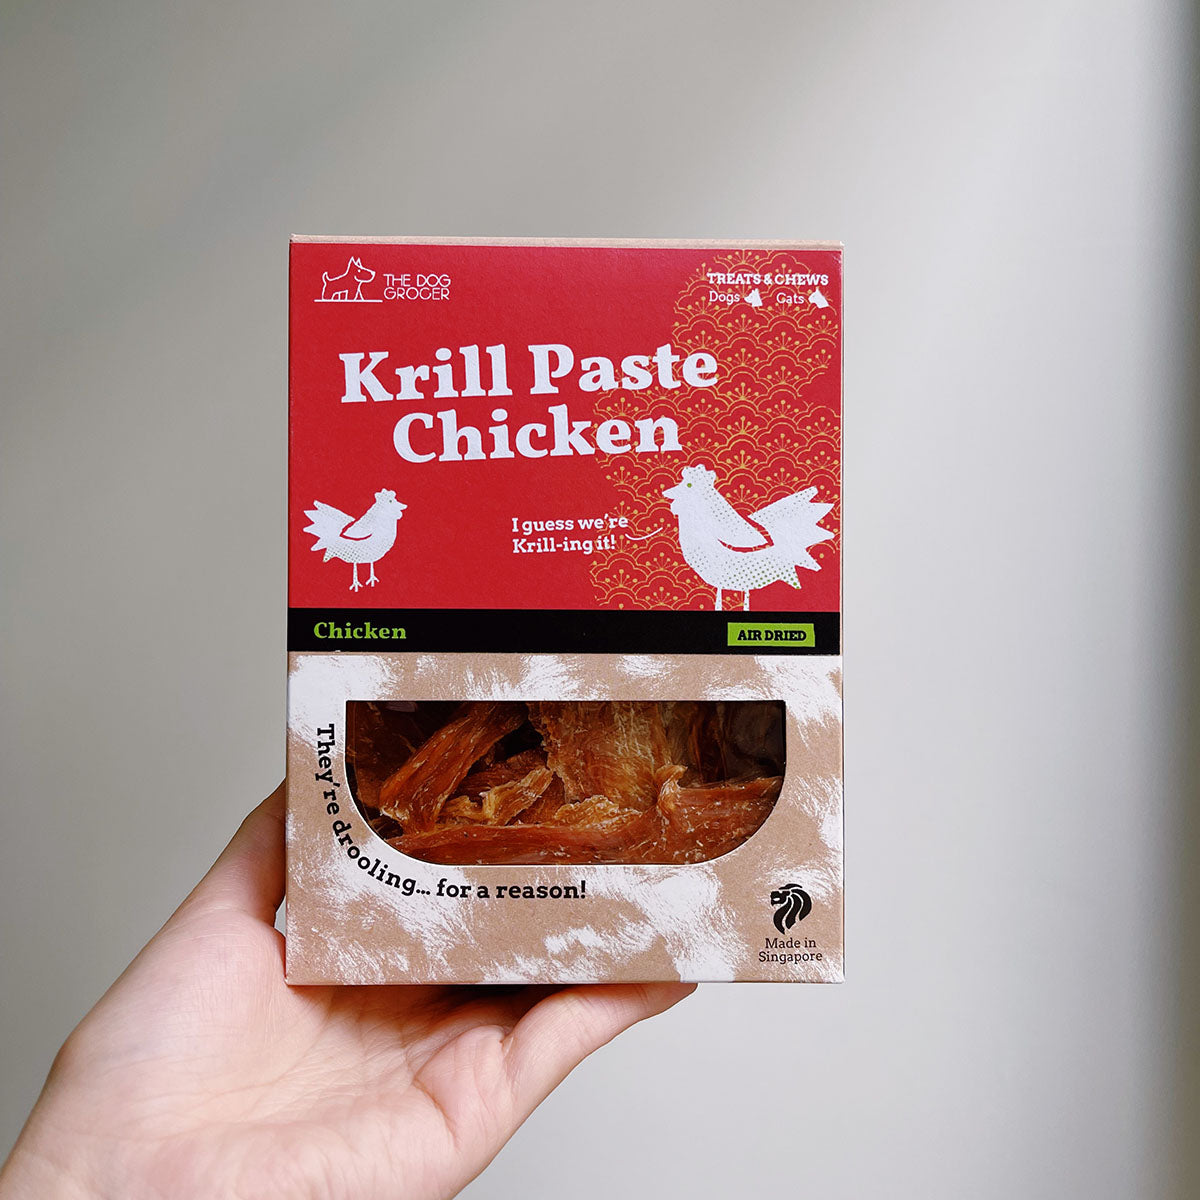 [CNY Special] The Dog Grocer Treats - Air Dried Krill Paste Chicken